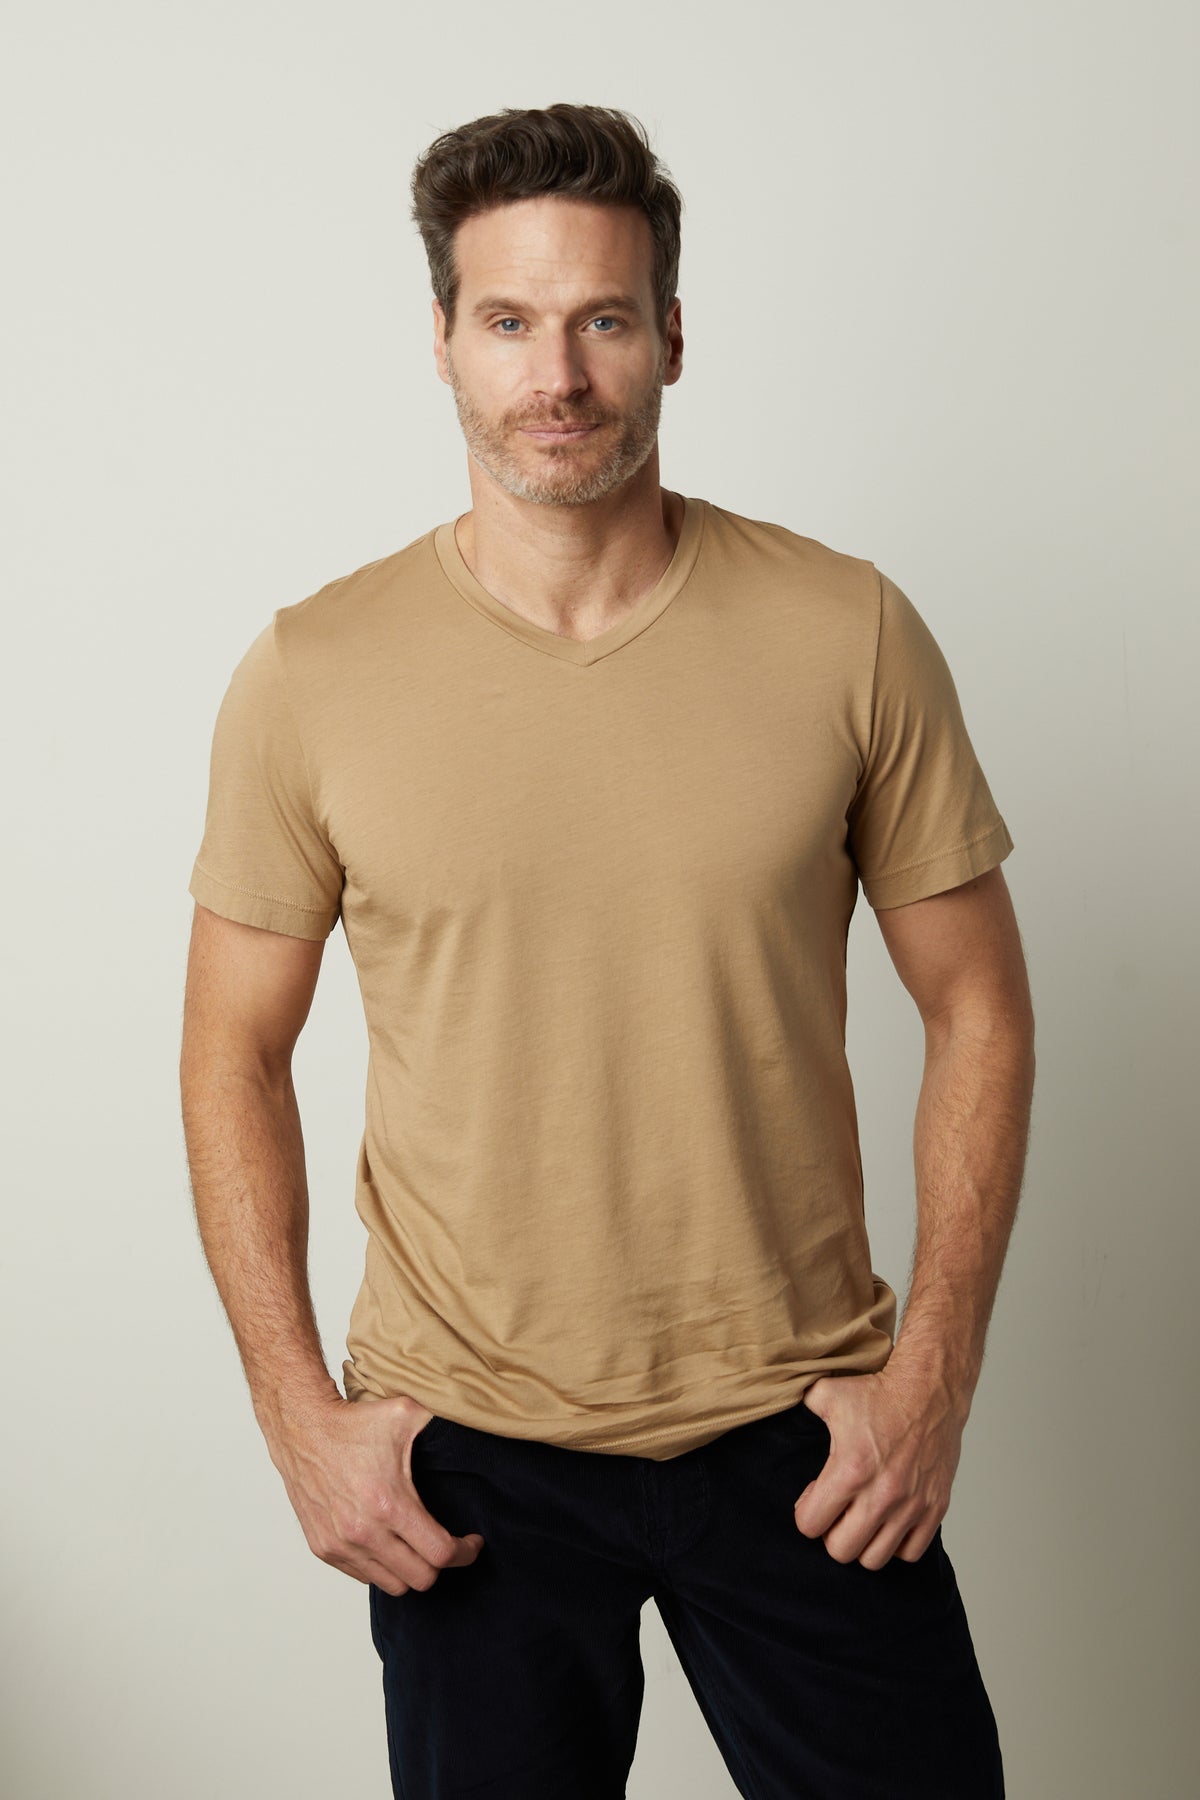 A silhouette of a man wearing a SAMSEN WHISPER CLASSIC V-NECK TEE created with whisper knit fabric, by Velvet by Graham & Spencer.-35783133790401